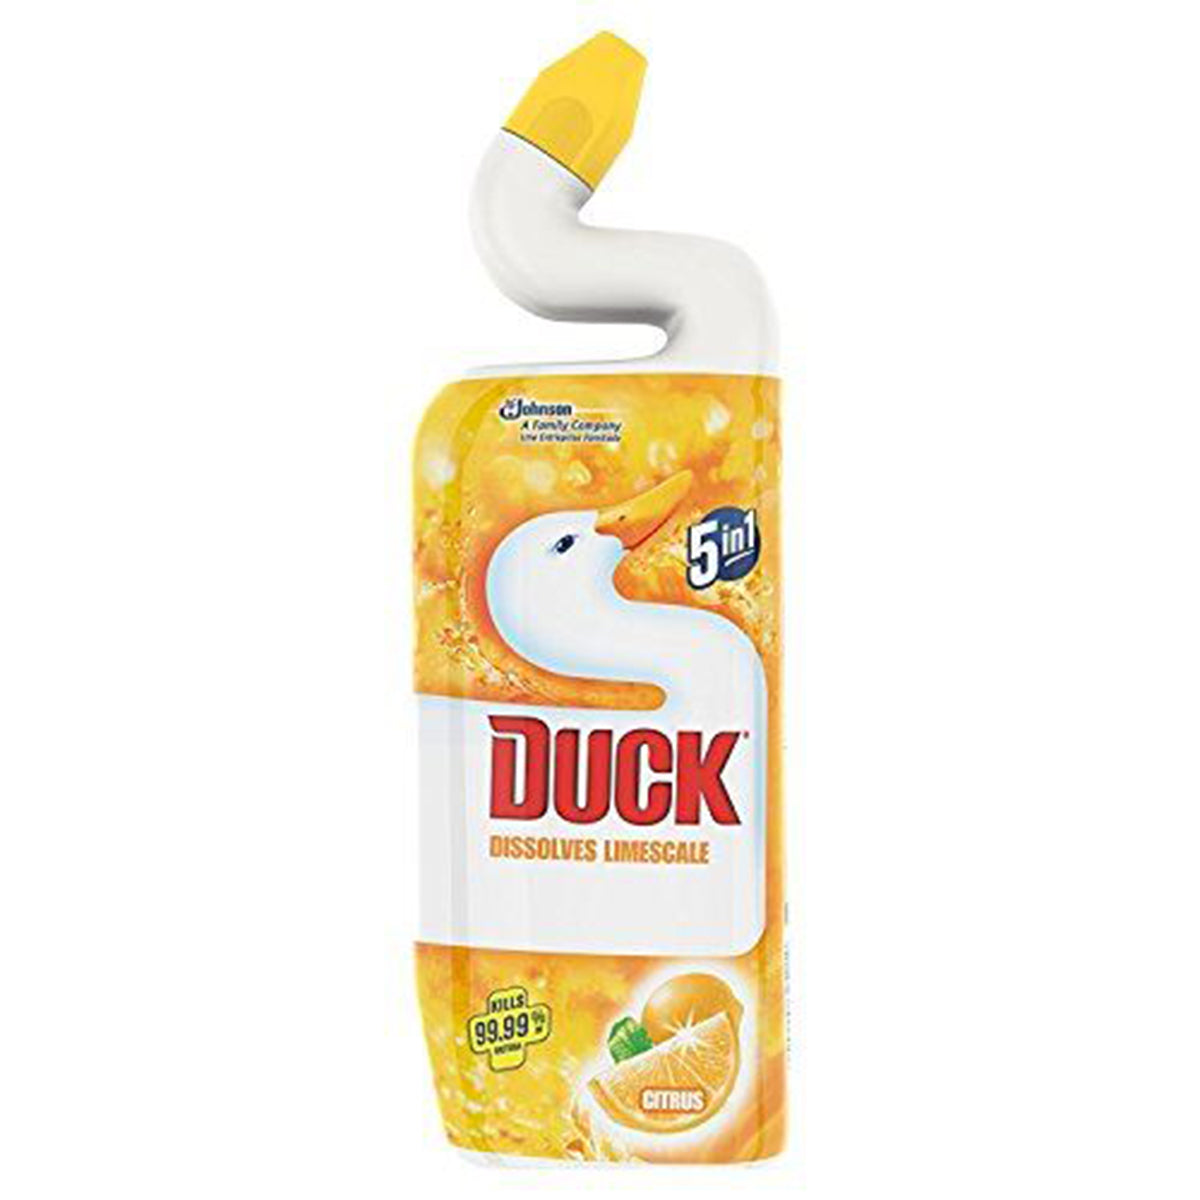 A bottle of Duck - Dissolve Limescale 5in1 - 750ml dishwashing liquid on a white background.